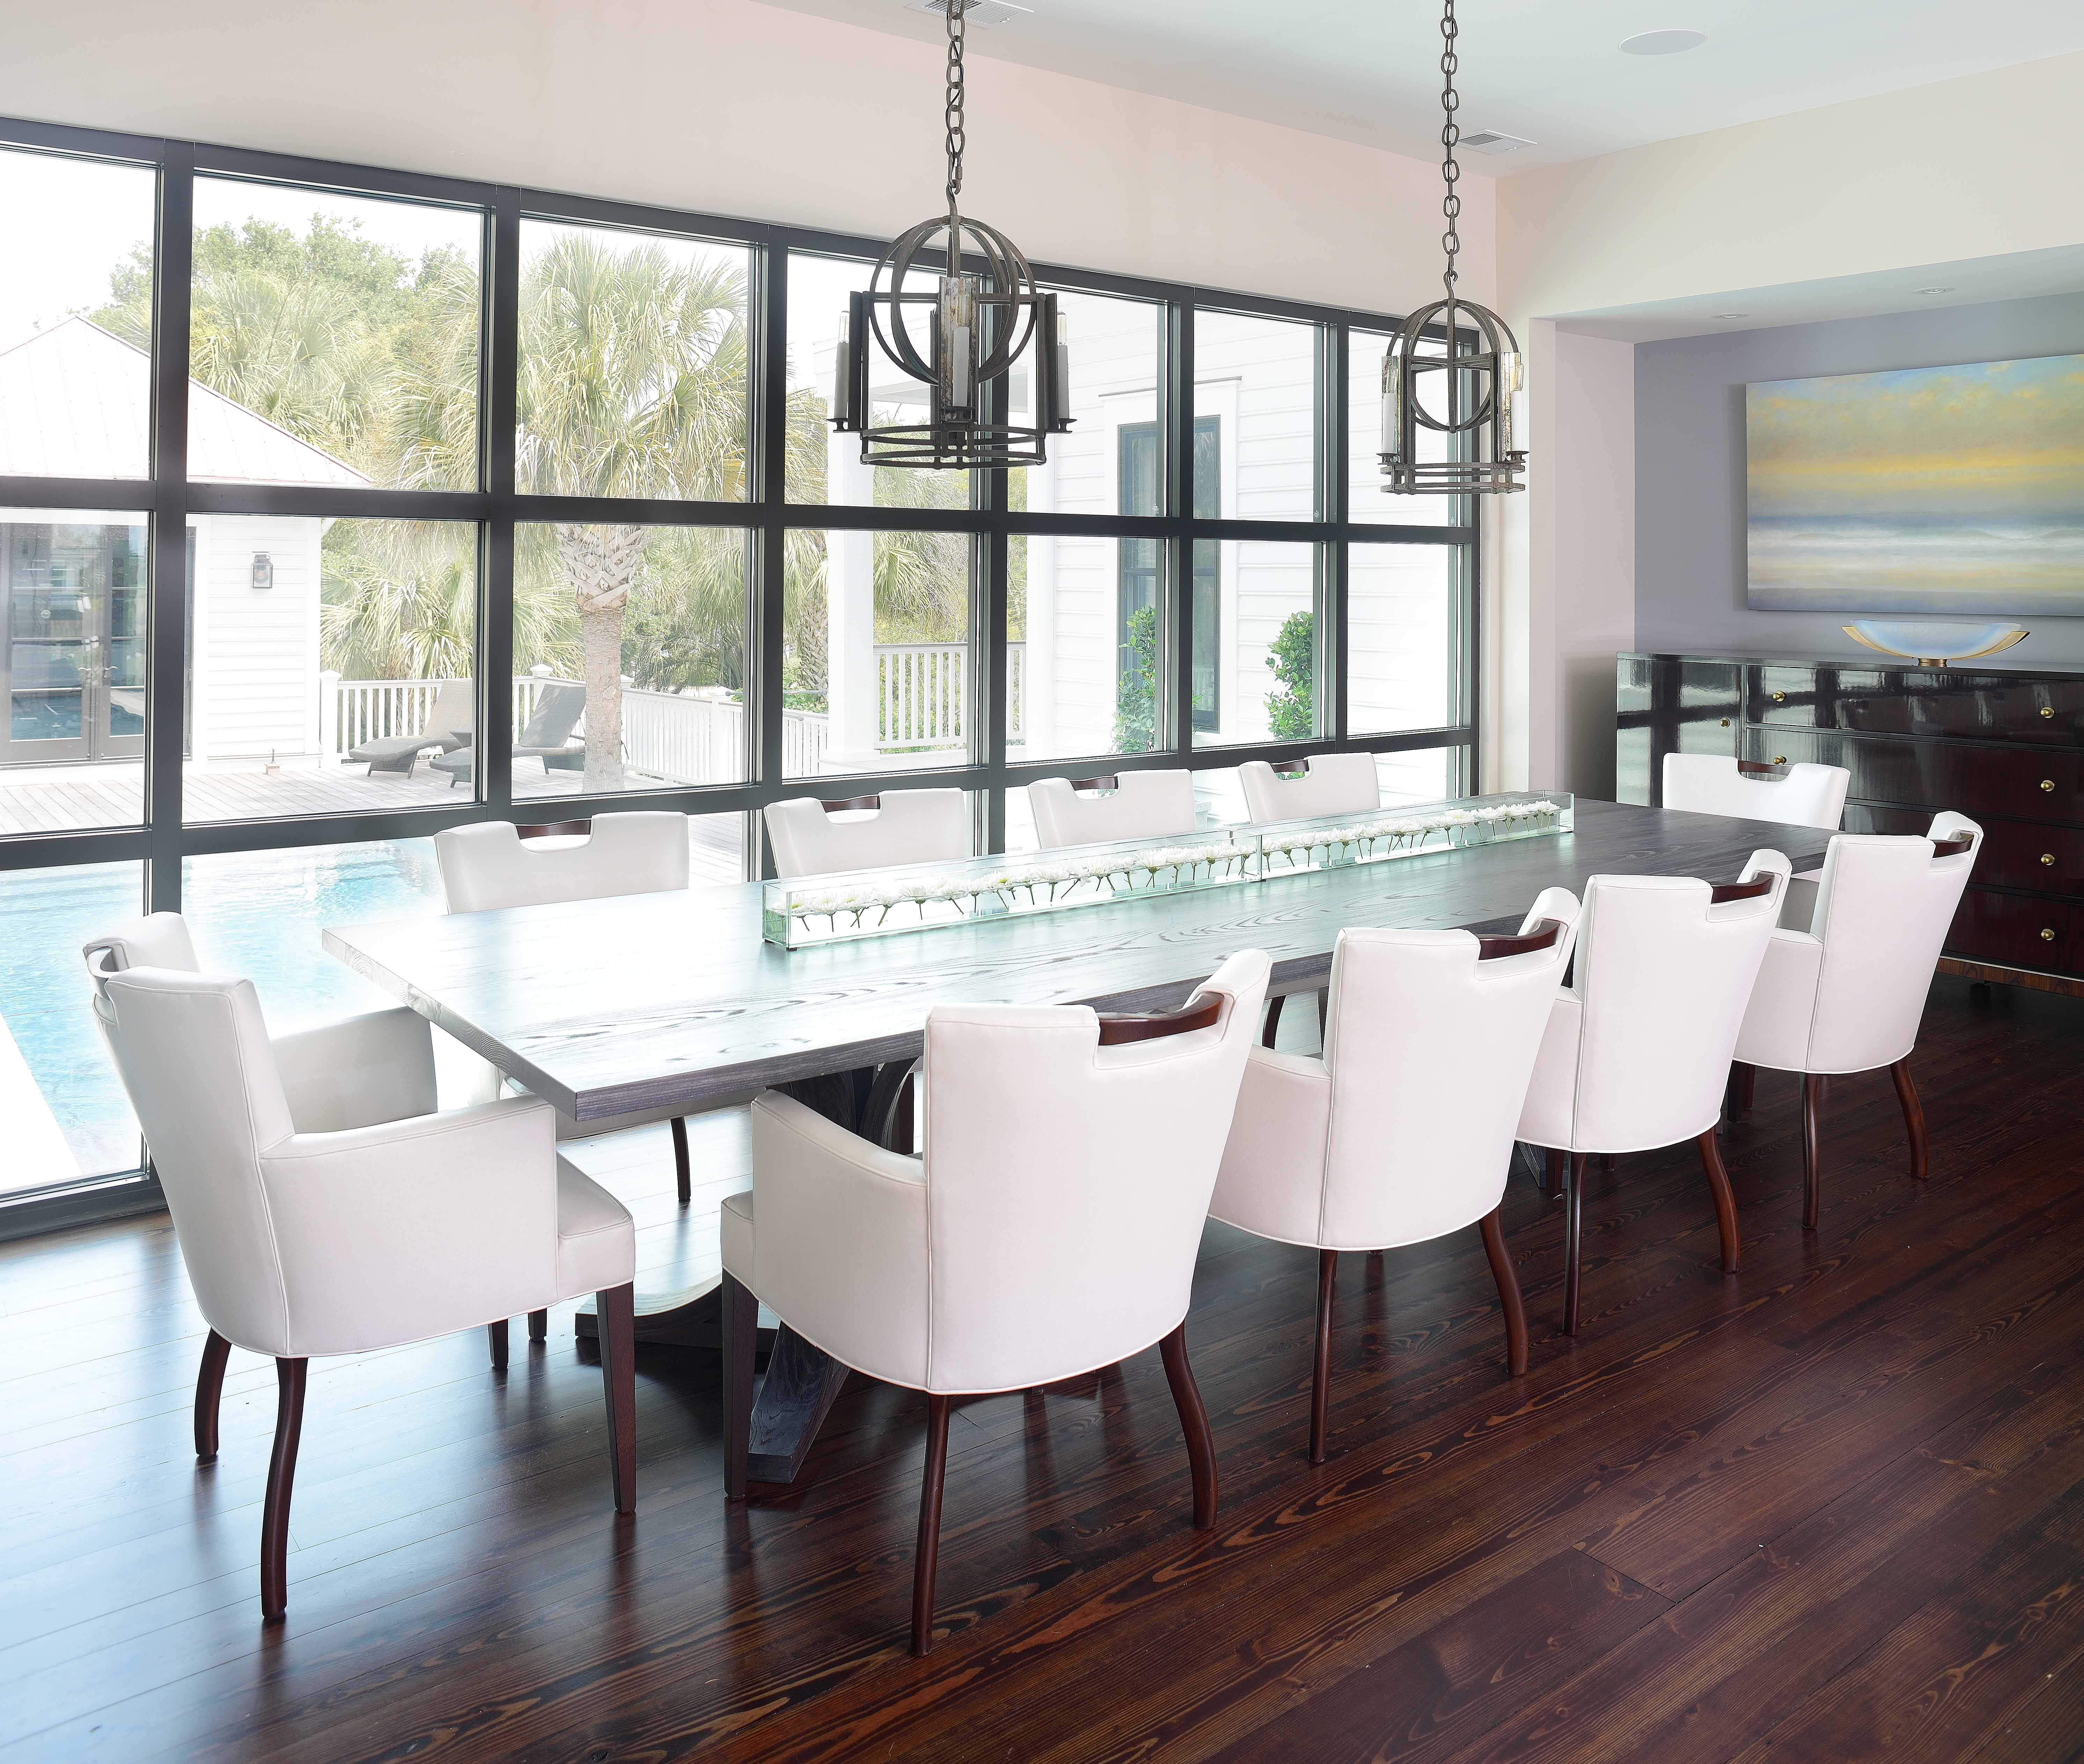 New 10 seat formal modern style dining room